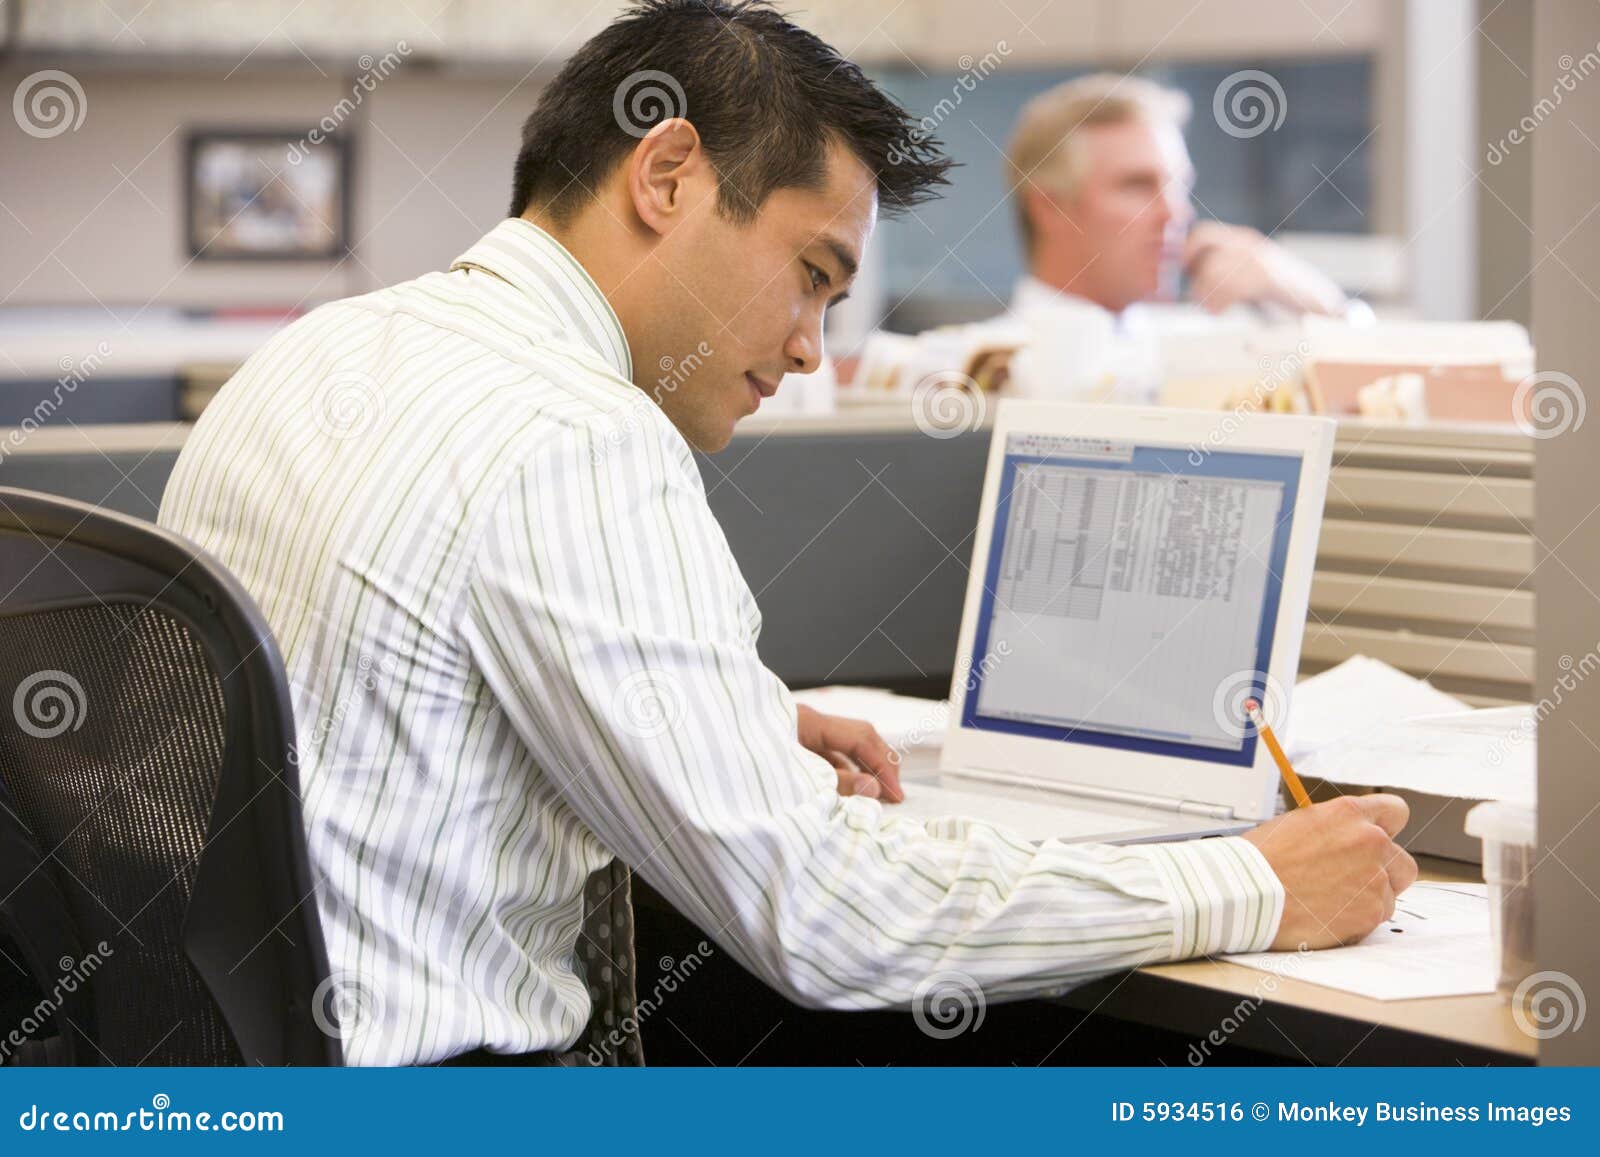 businessman in cubicle with laptop writing